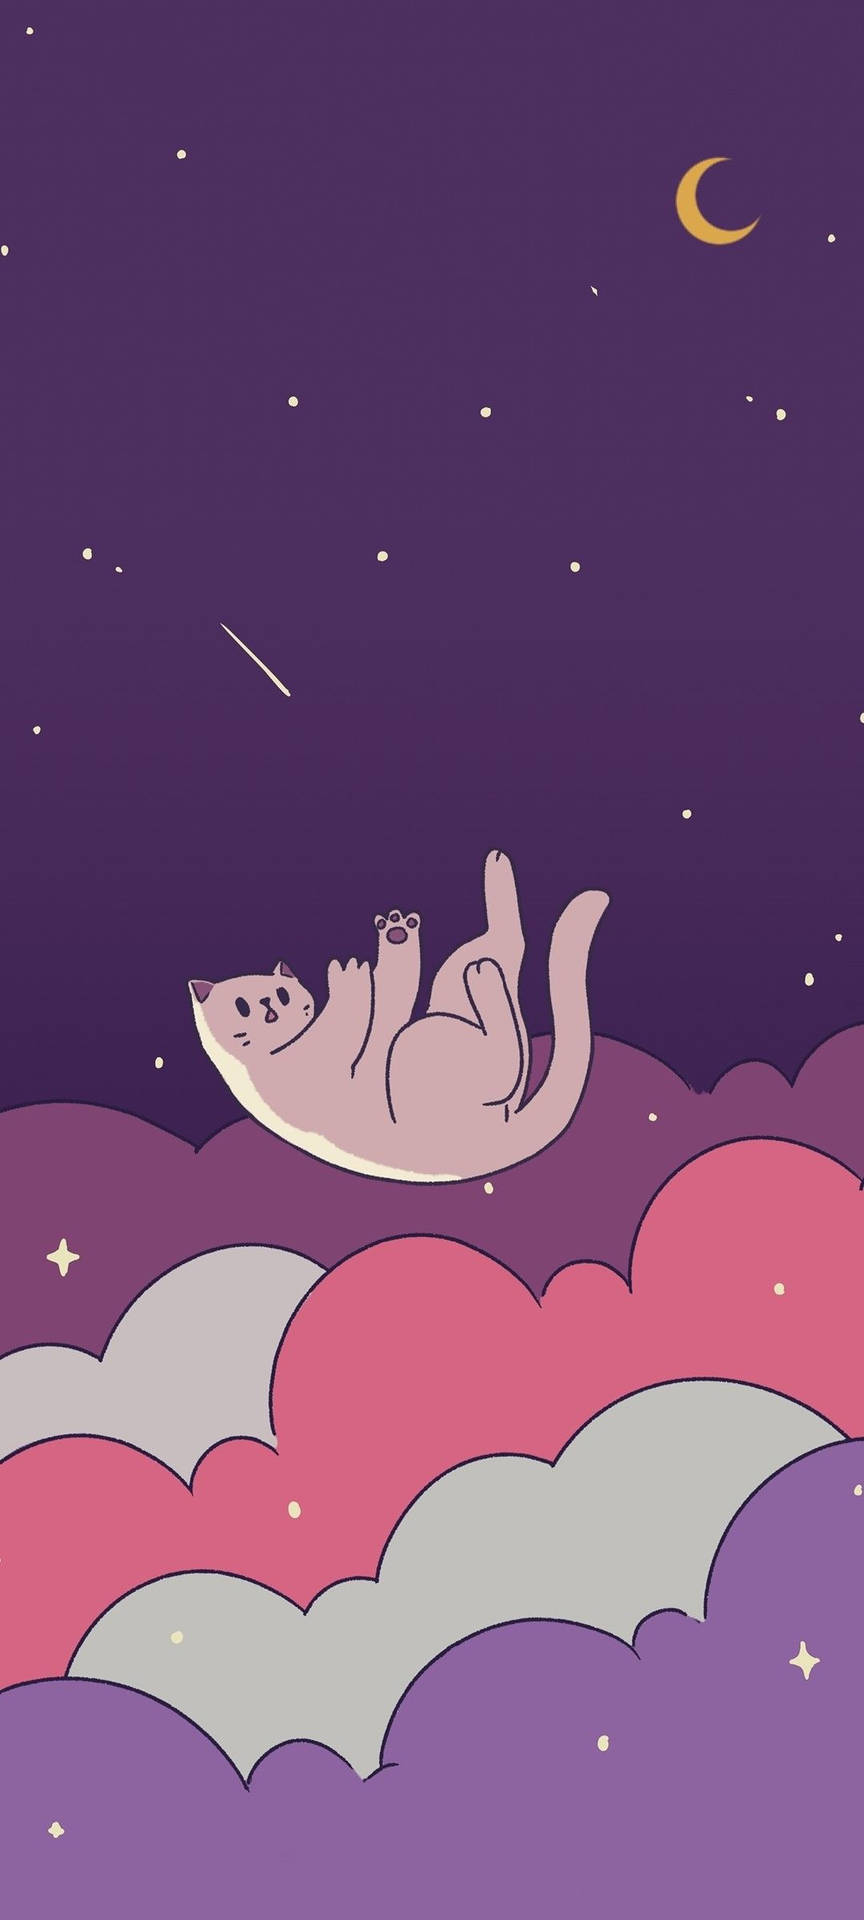 Aesthetic Falling Cat For Iphone